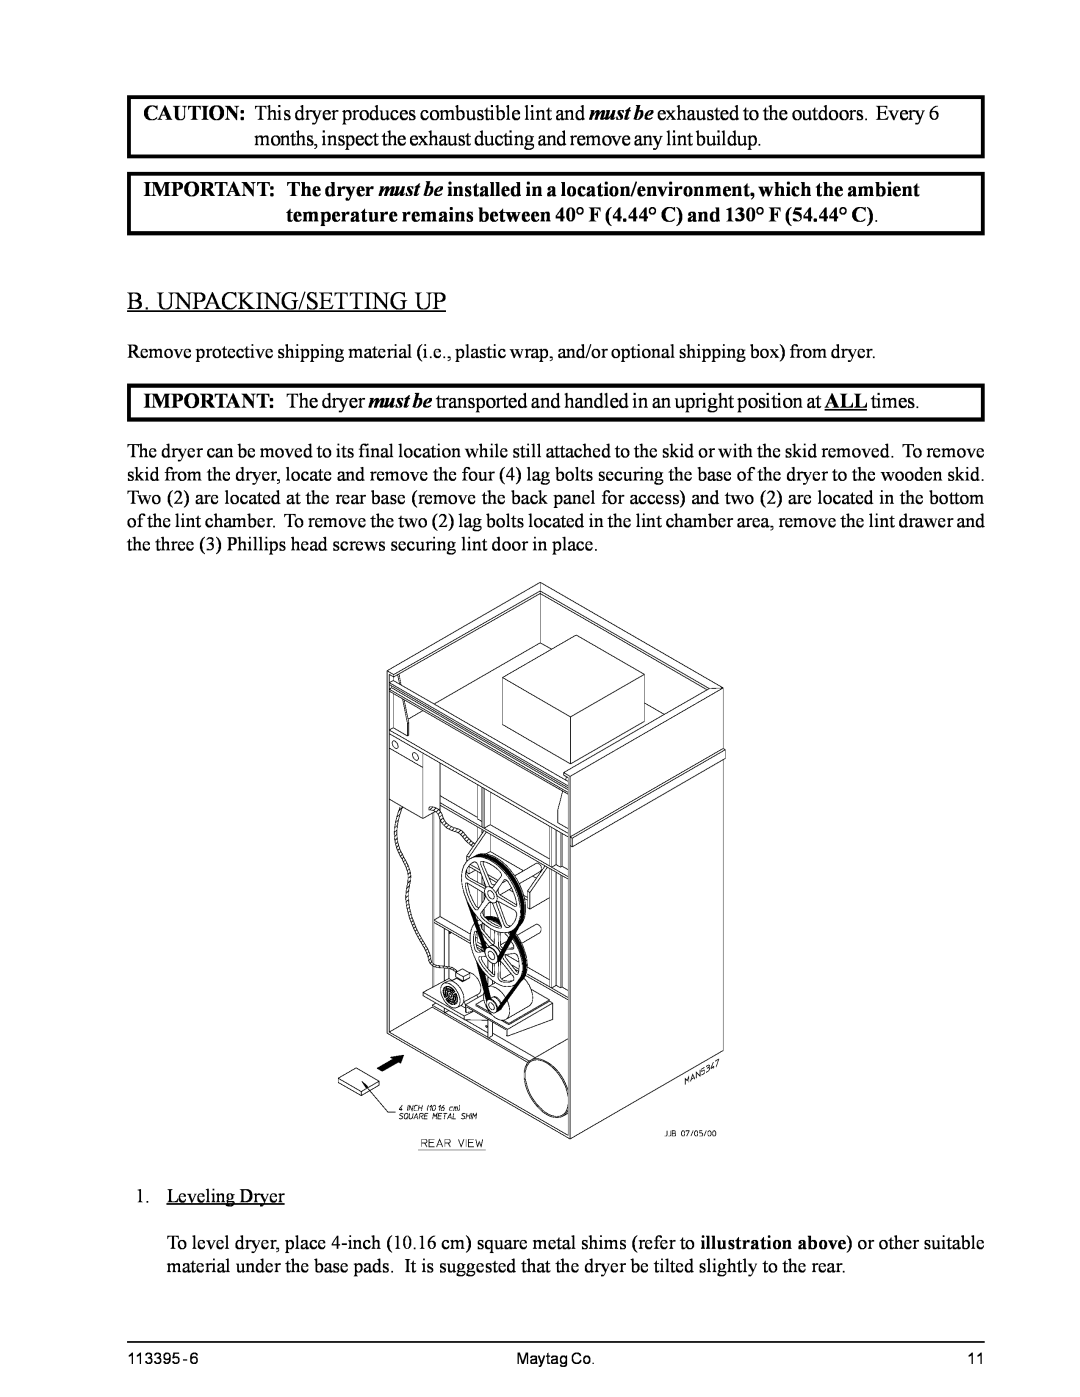 American Dryer Corp MDG-120PVV, MD-170PTVW installation manual B. Unpacking/Setting Up 